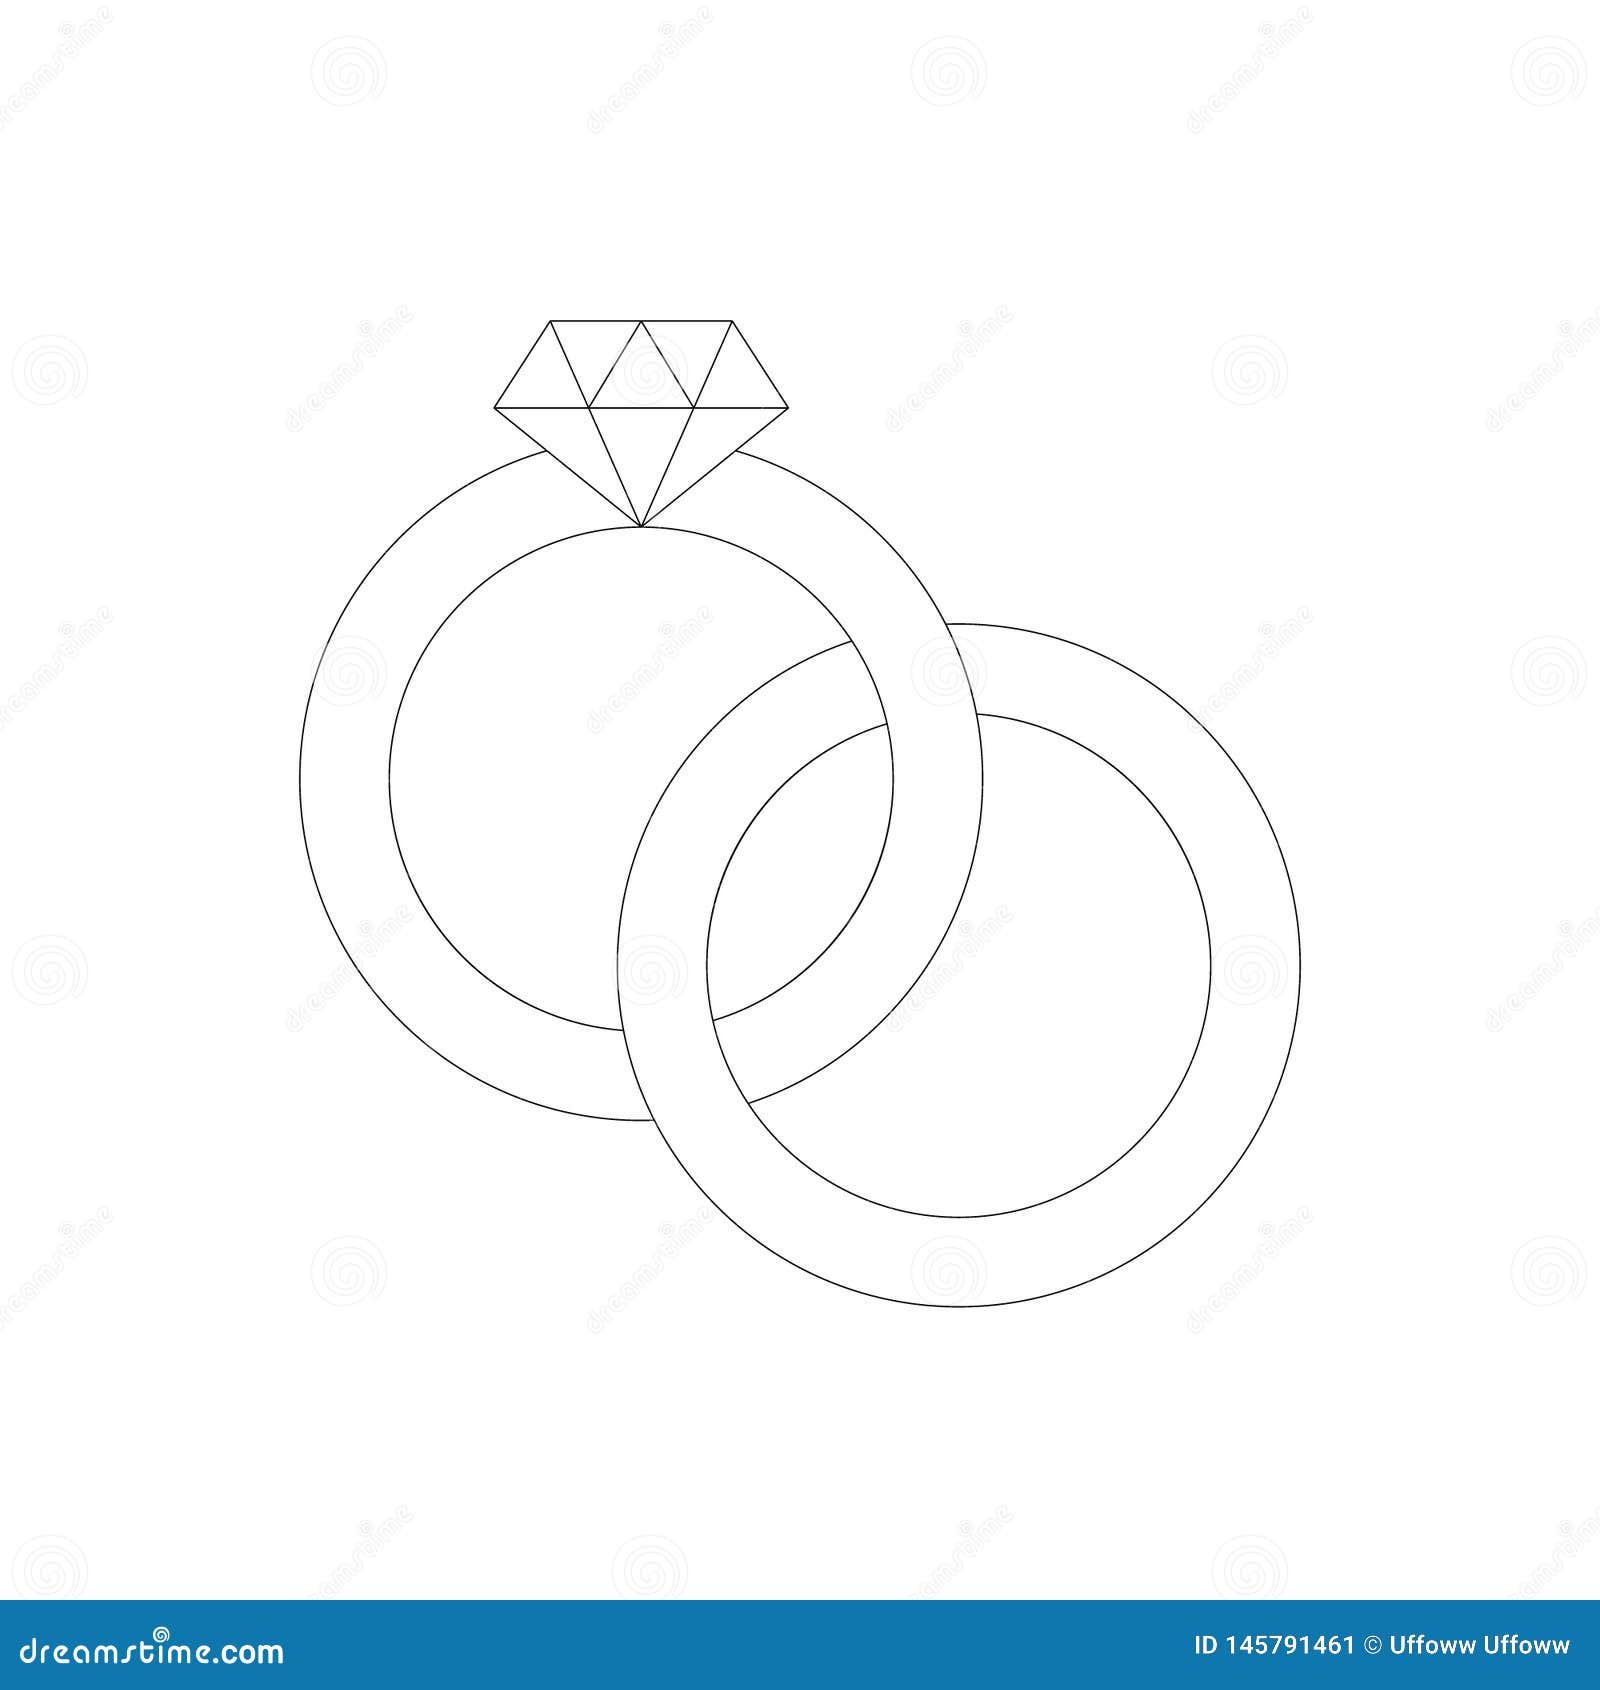 Pencil Drawing Wedding Ring Jewelry Sketch Stock Illustration 1308573040 |  Shutterstock